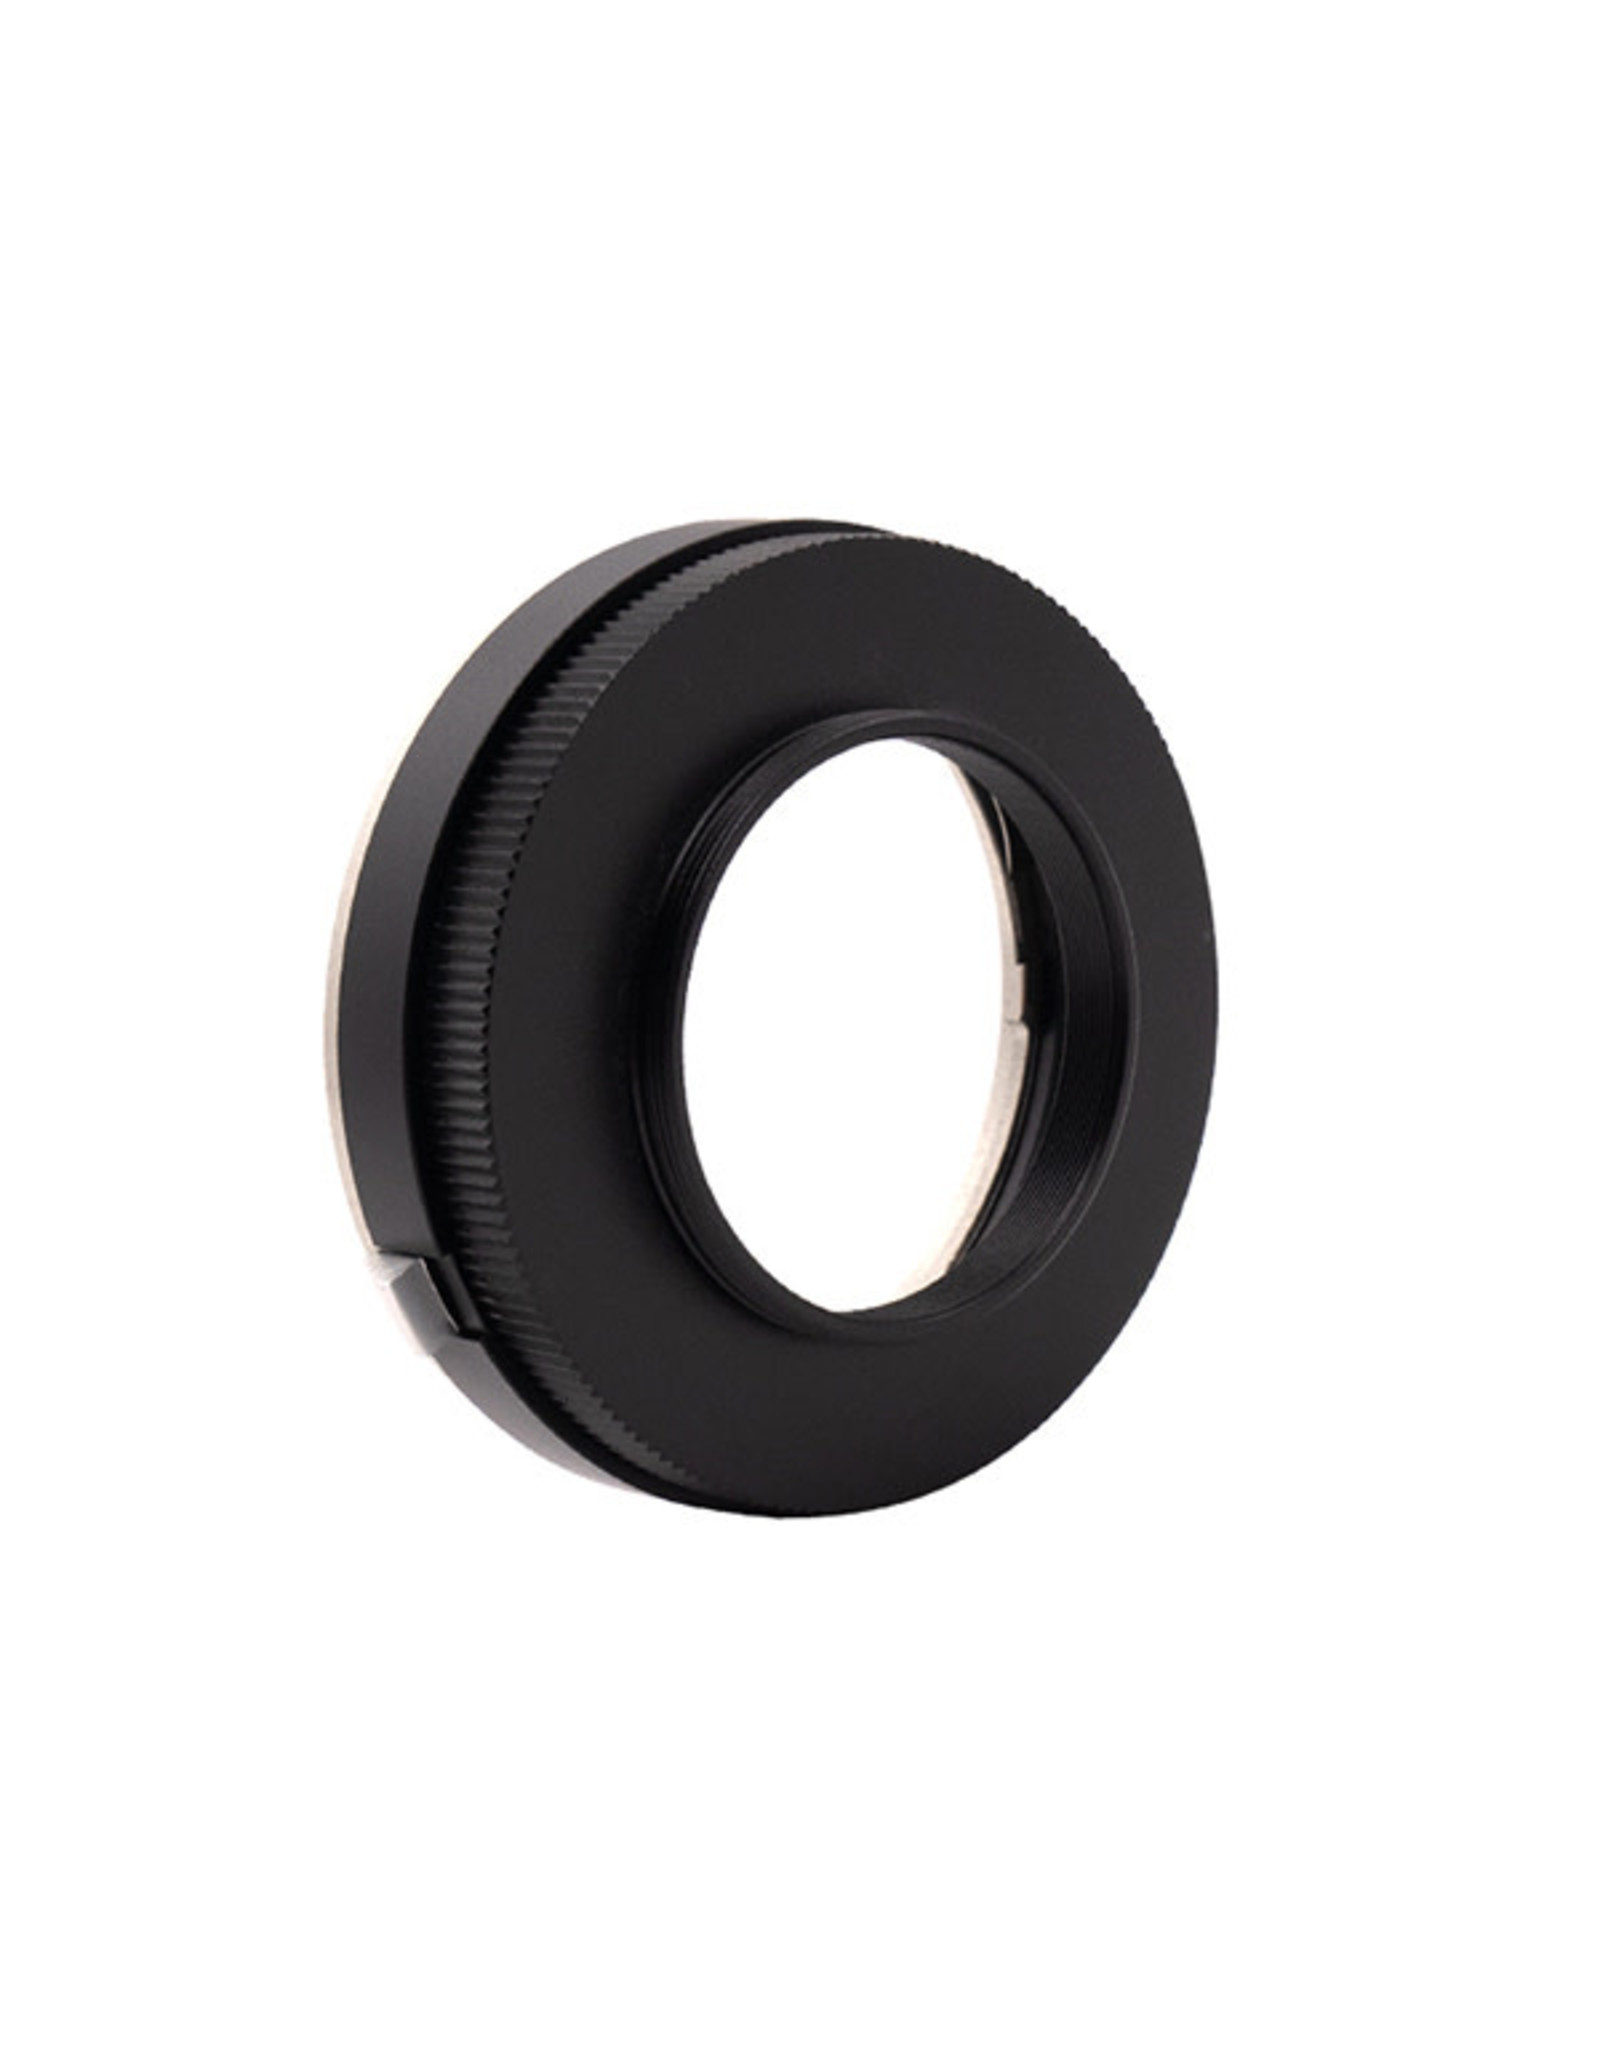 ZWO ZWO New EOS Lens Adapter II for EFW & ASI1600